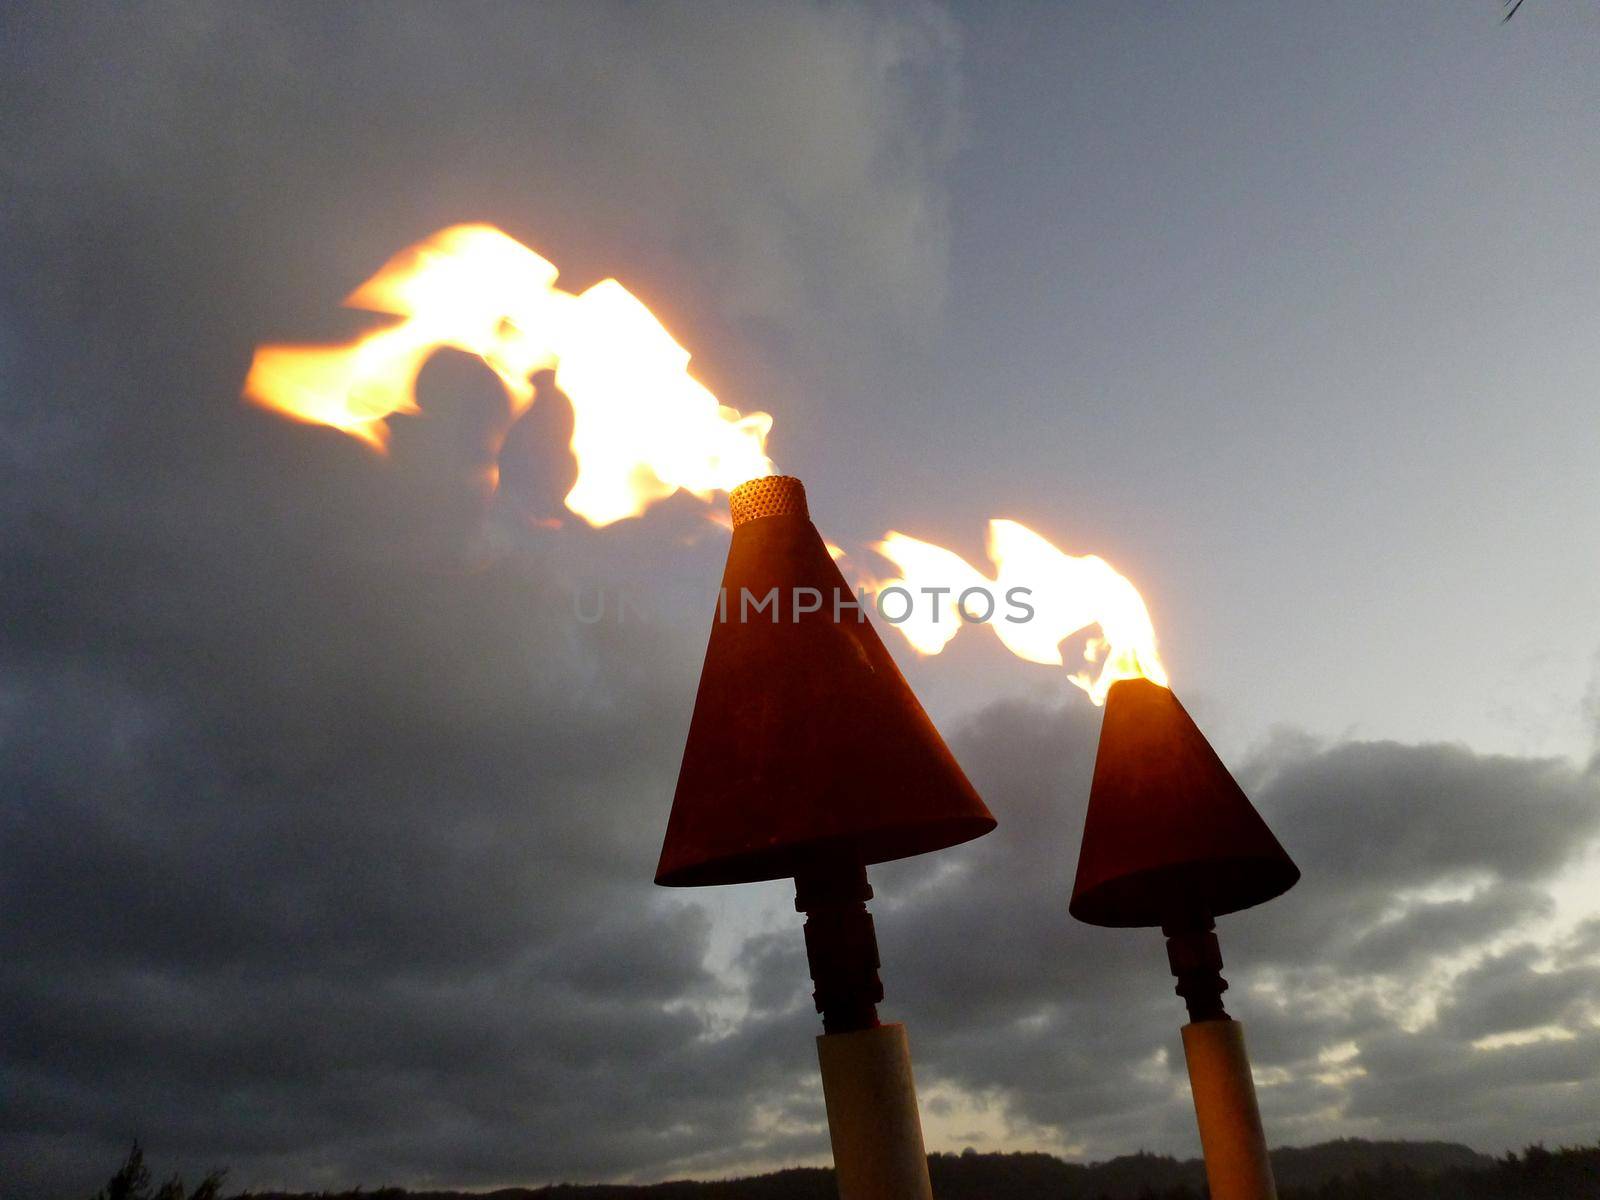 Flames burn from Tiki torches at dusk on the North Shore of Oahu.